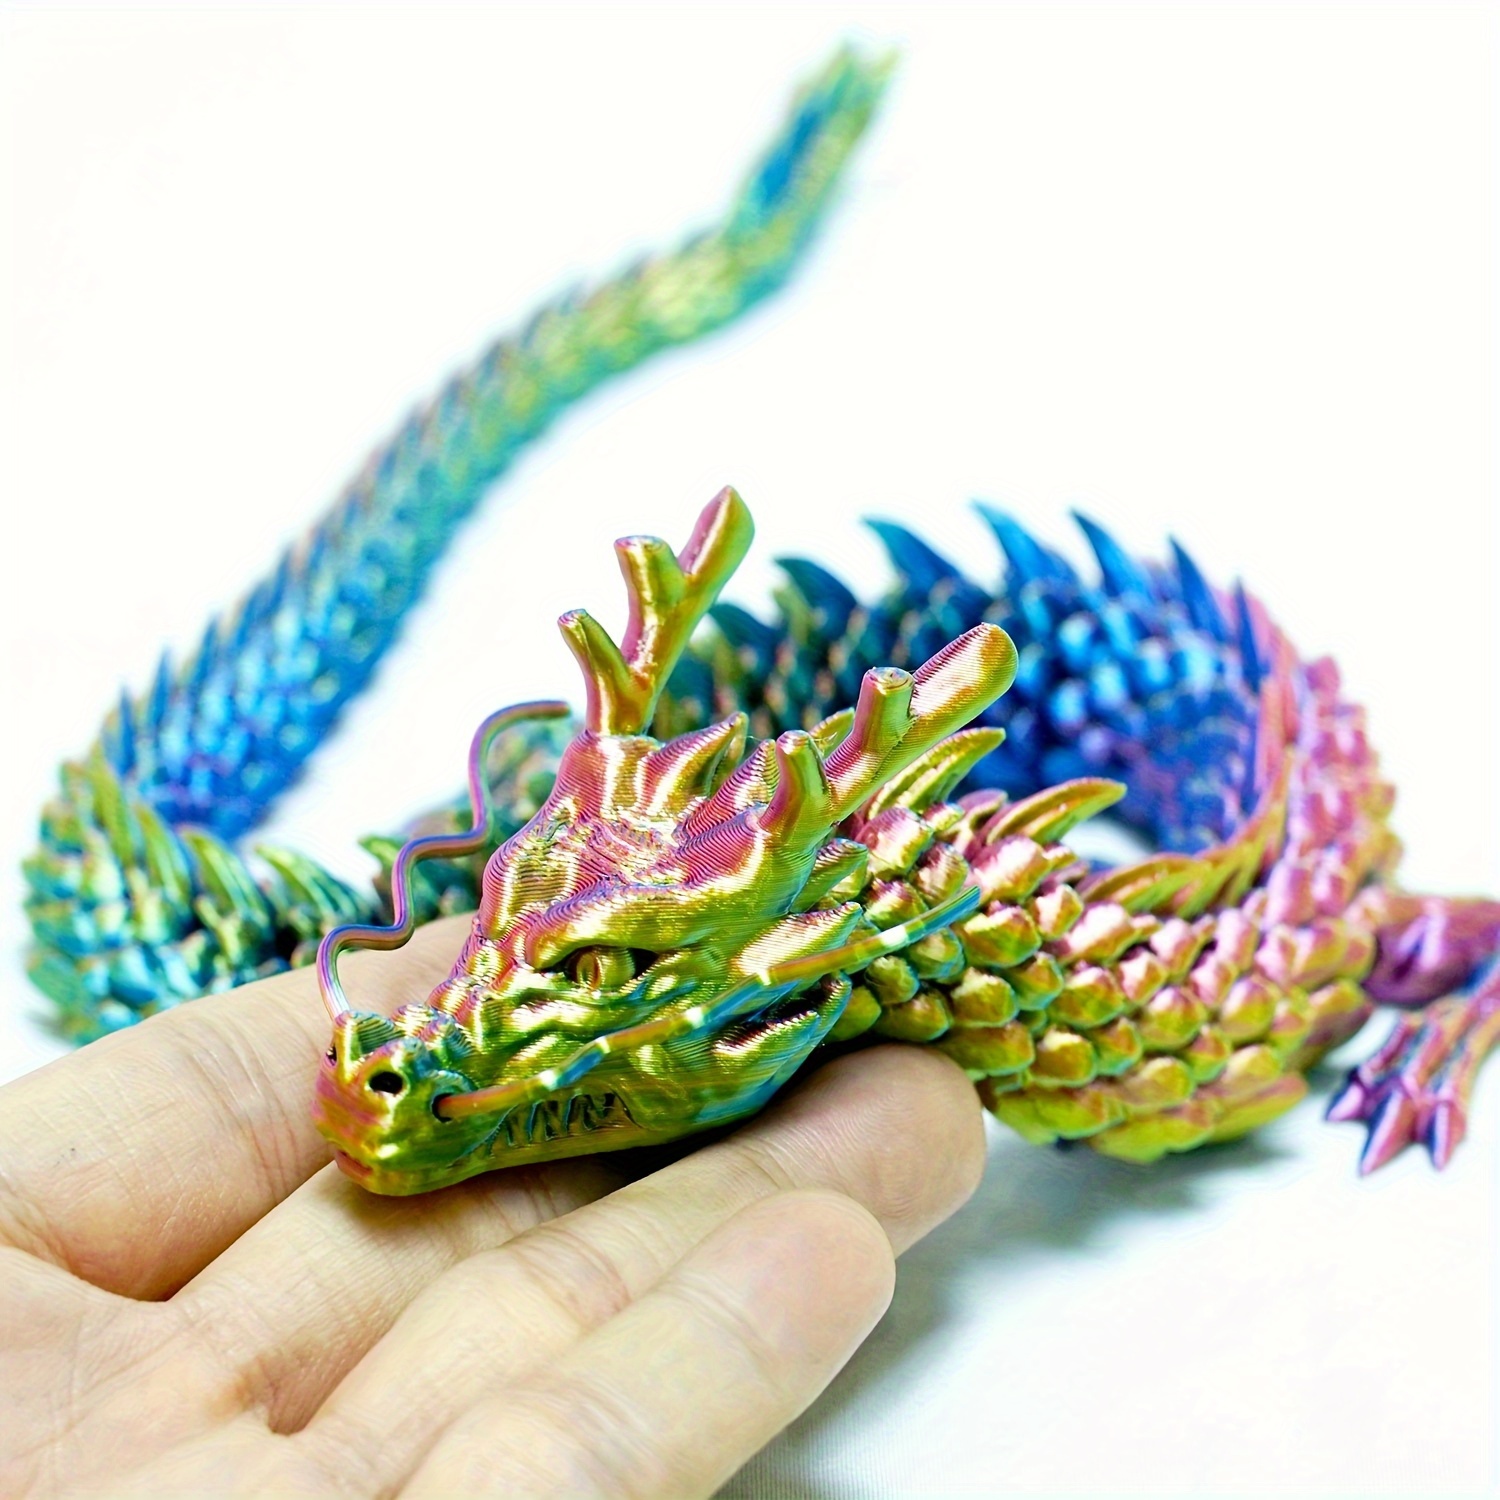 3D Printed Dragon, Articulated Dragon Fidget Toy Posable Flexible Dragon  Toys for Car Decoration and Ornament Figures 